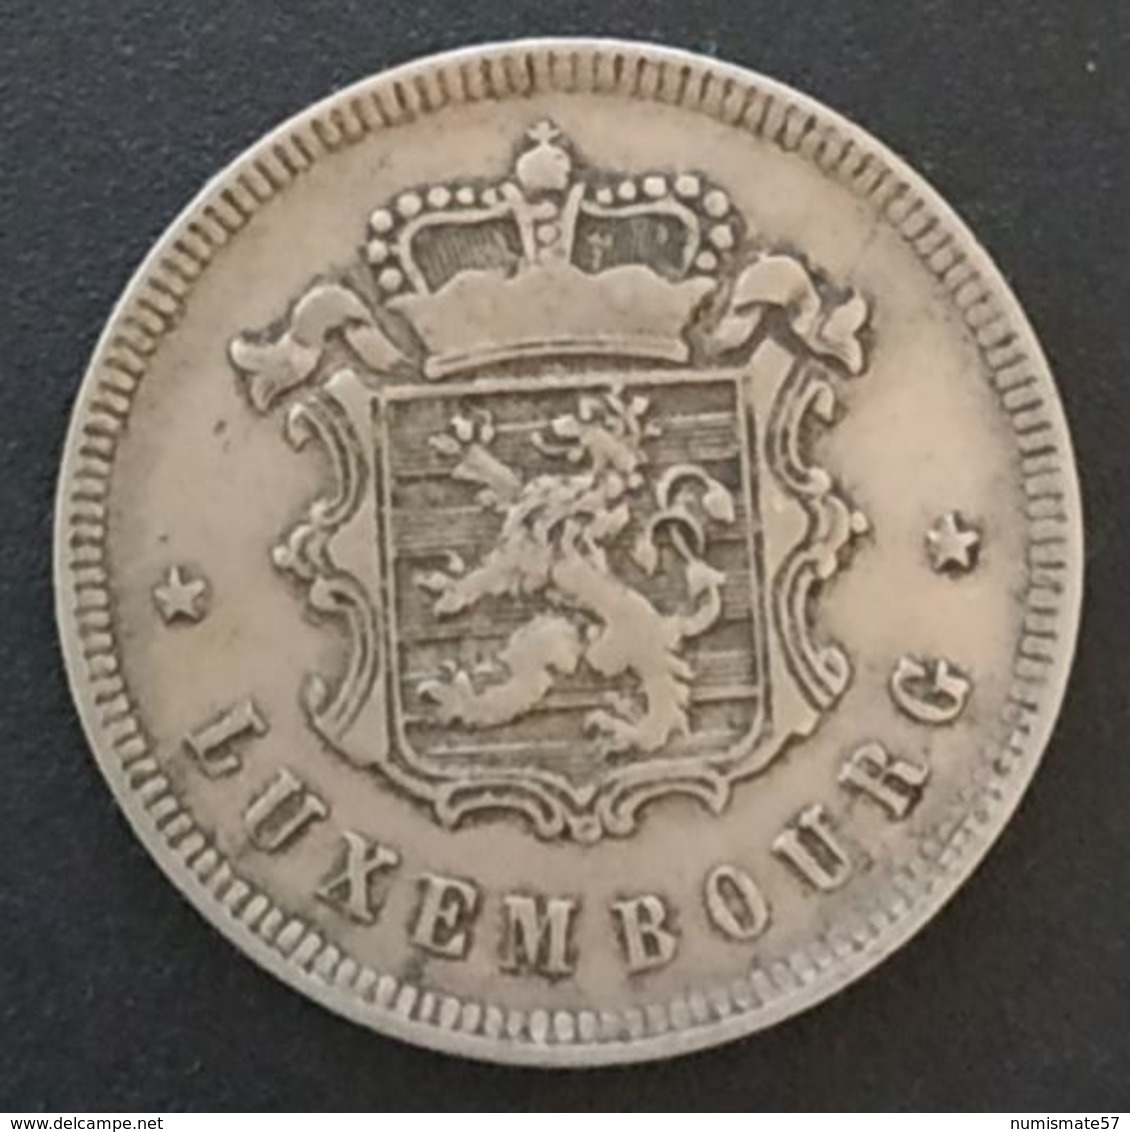 LUXEMBOURG - 25 CENTIMES 1927 - KM 37 - Luxembourg